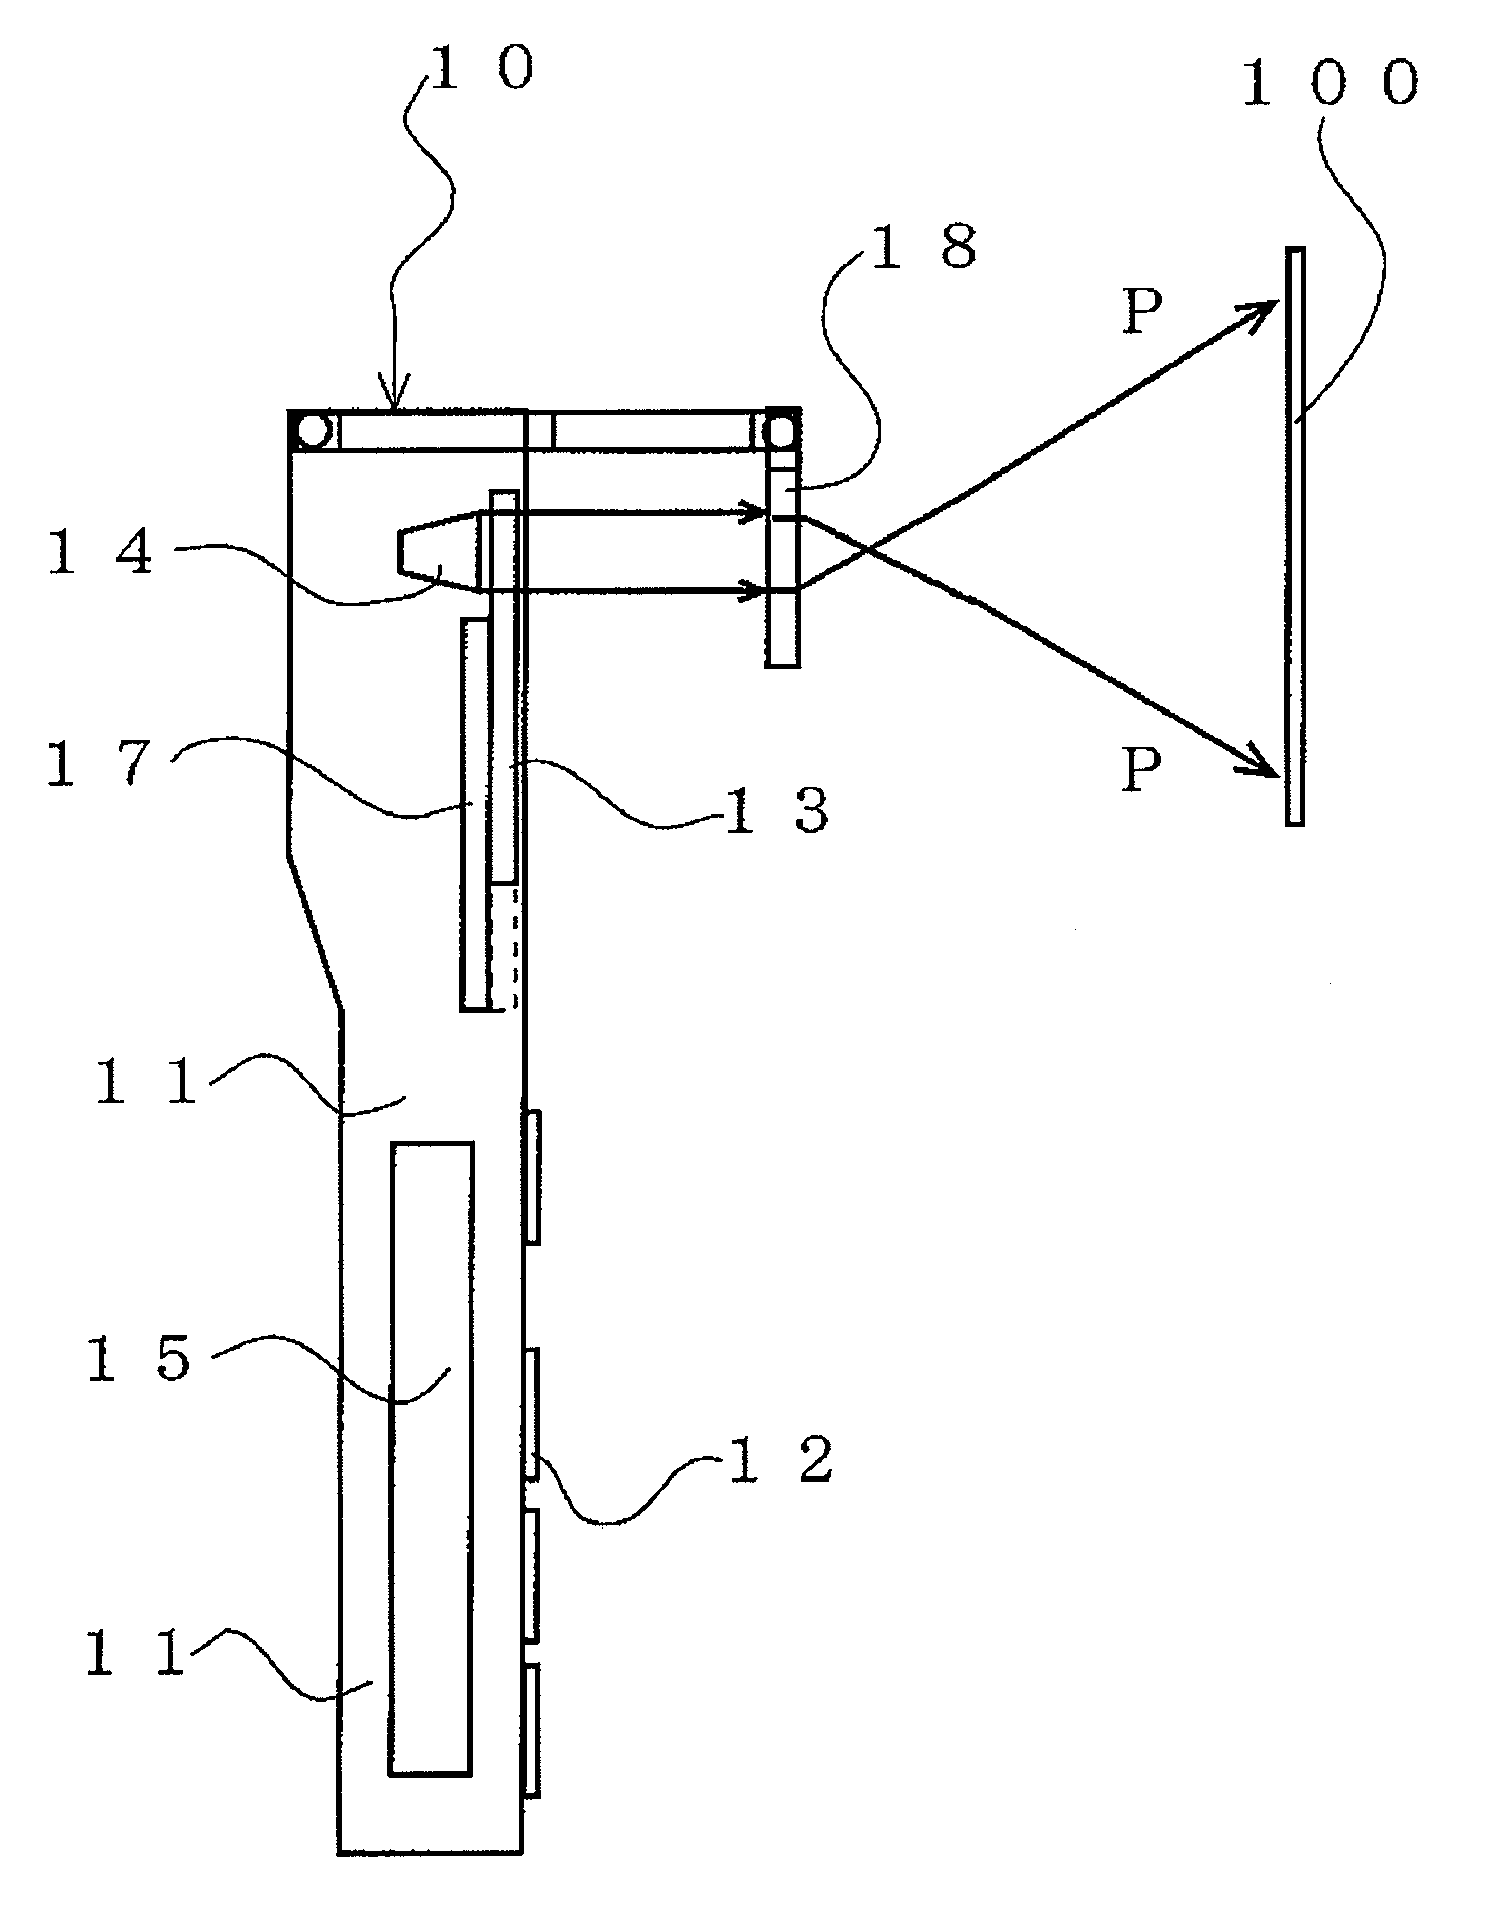 Mobile phone with an image projection device